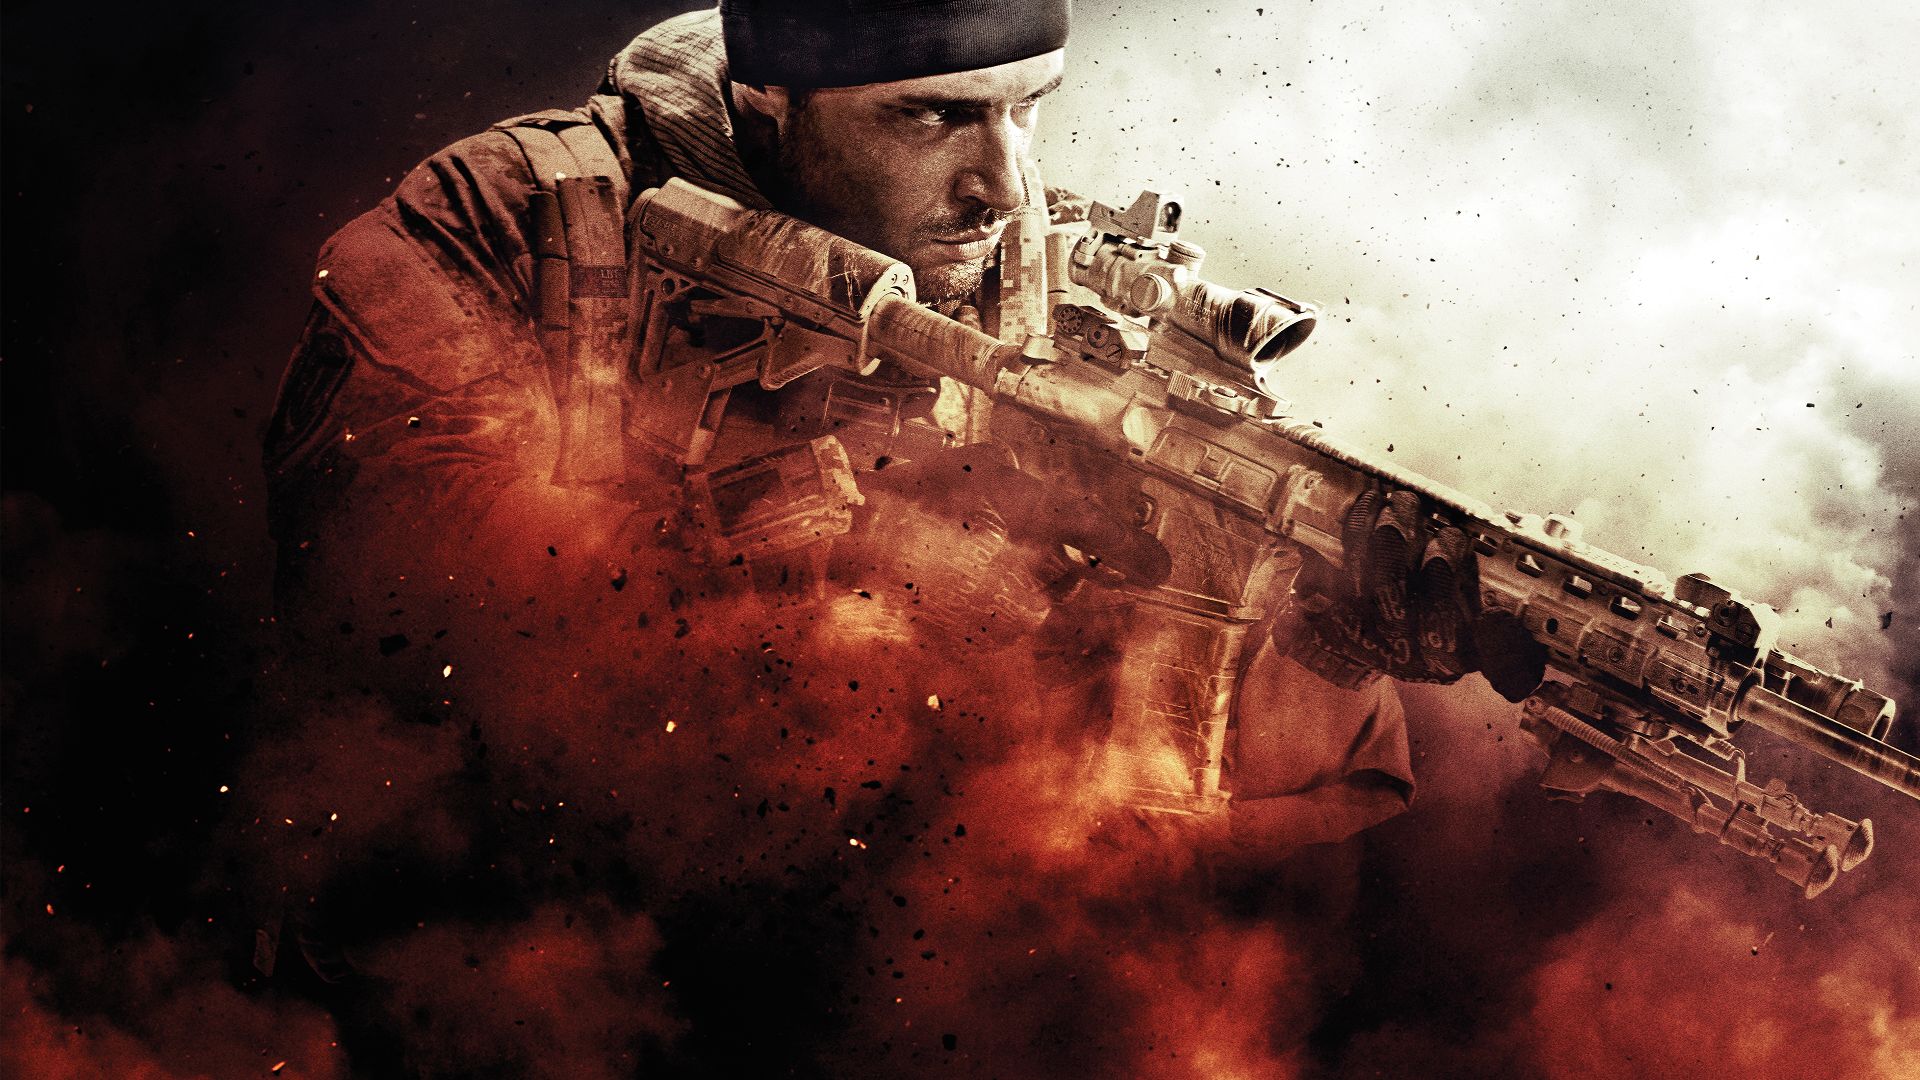 Medal of Honor: Warfighter PC system requirements